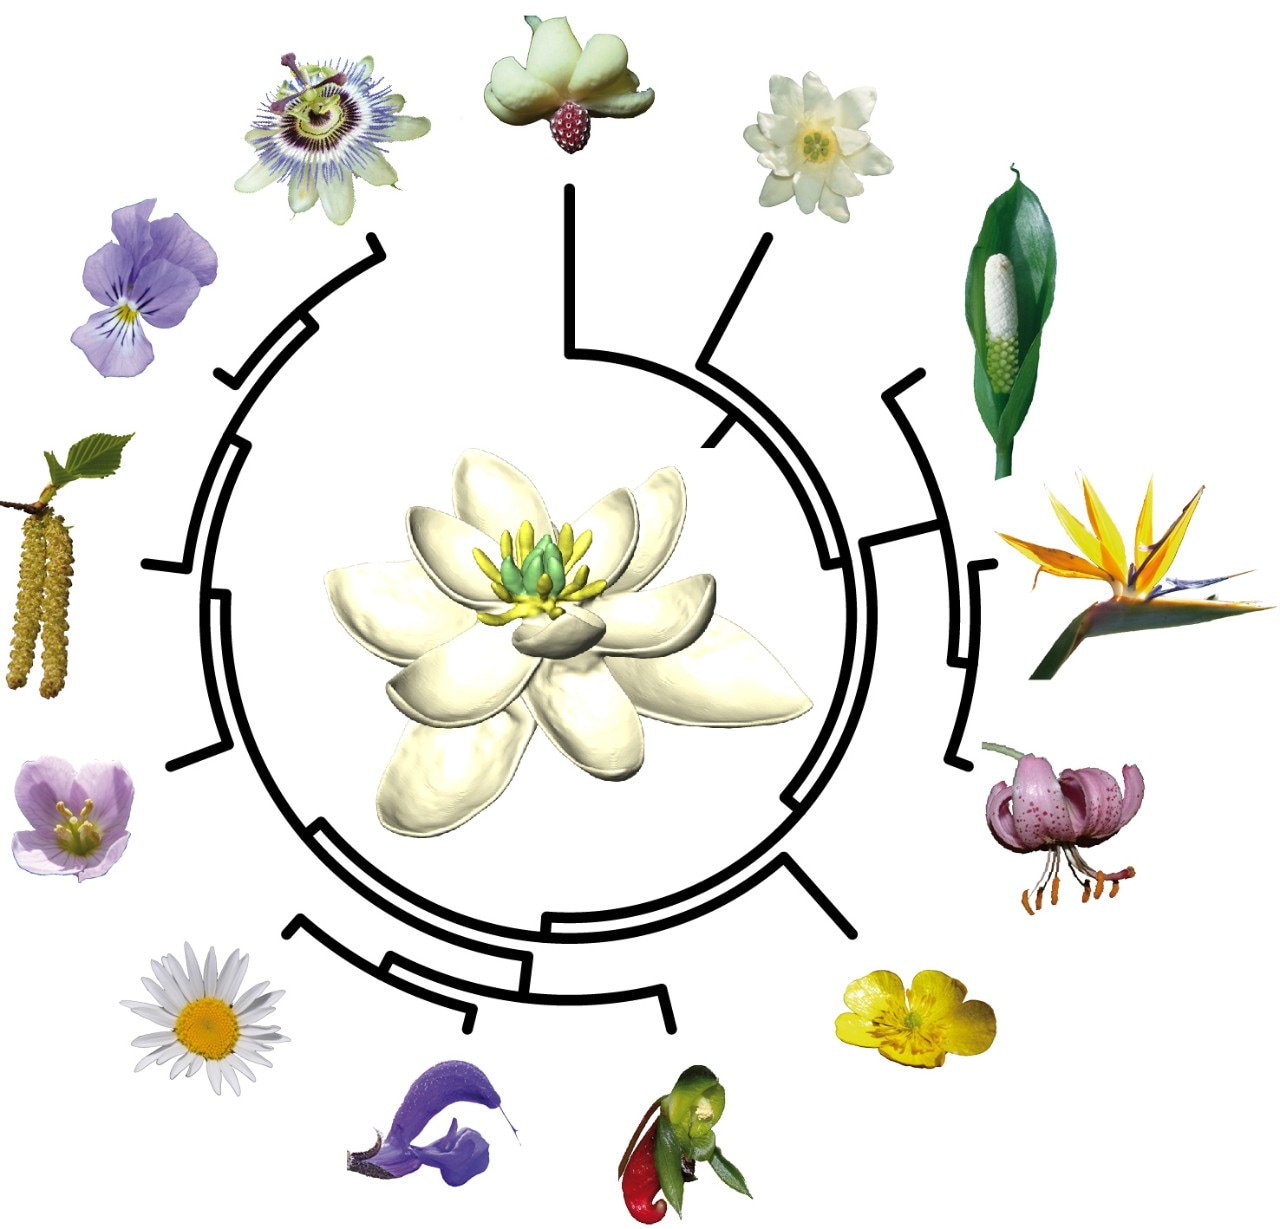 All living flowers ultimately derive from a single ancestor (centre) that lived about 140 million years ago. To find out what this ancestral flower may have looked like and trace back the evolution of flowers since then, the study used the evolutionary tree (here simplified) that connects all living species of flowering plants. Credit: Hervé Sauquet and Jürg Schönenberger.